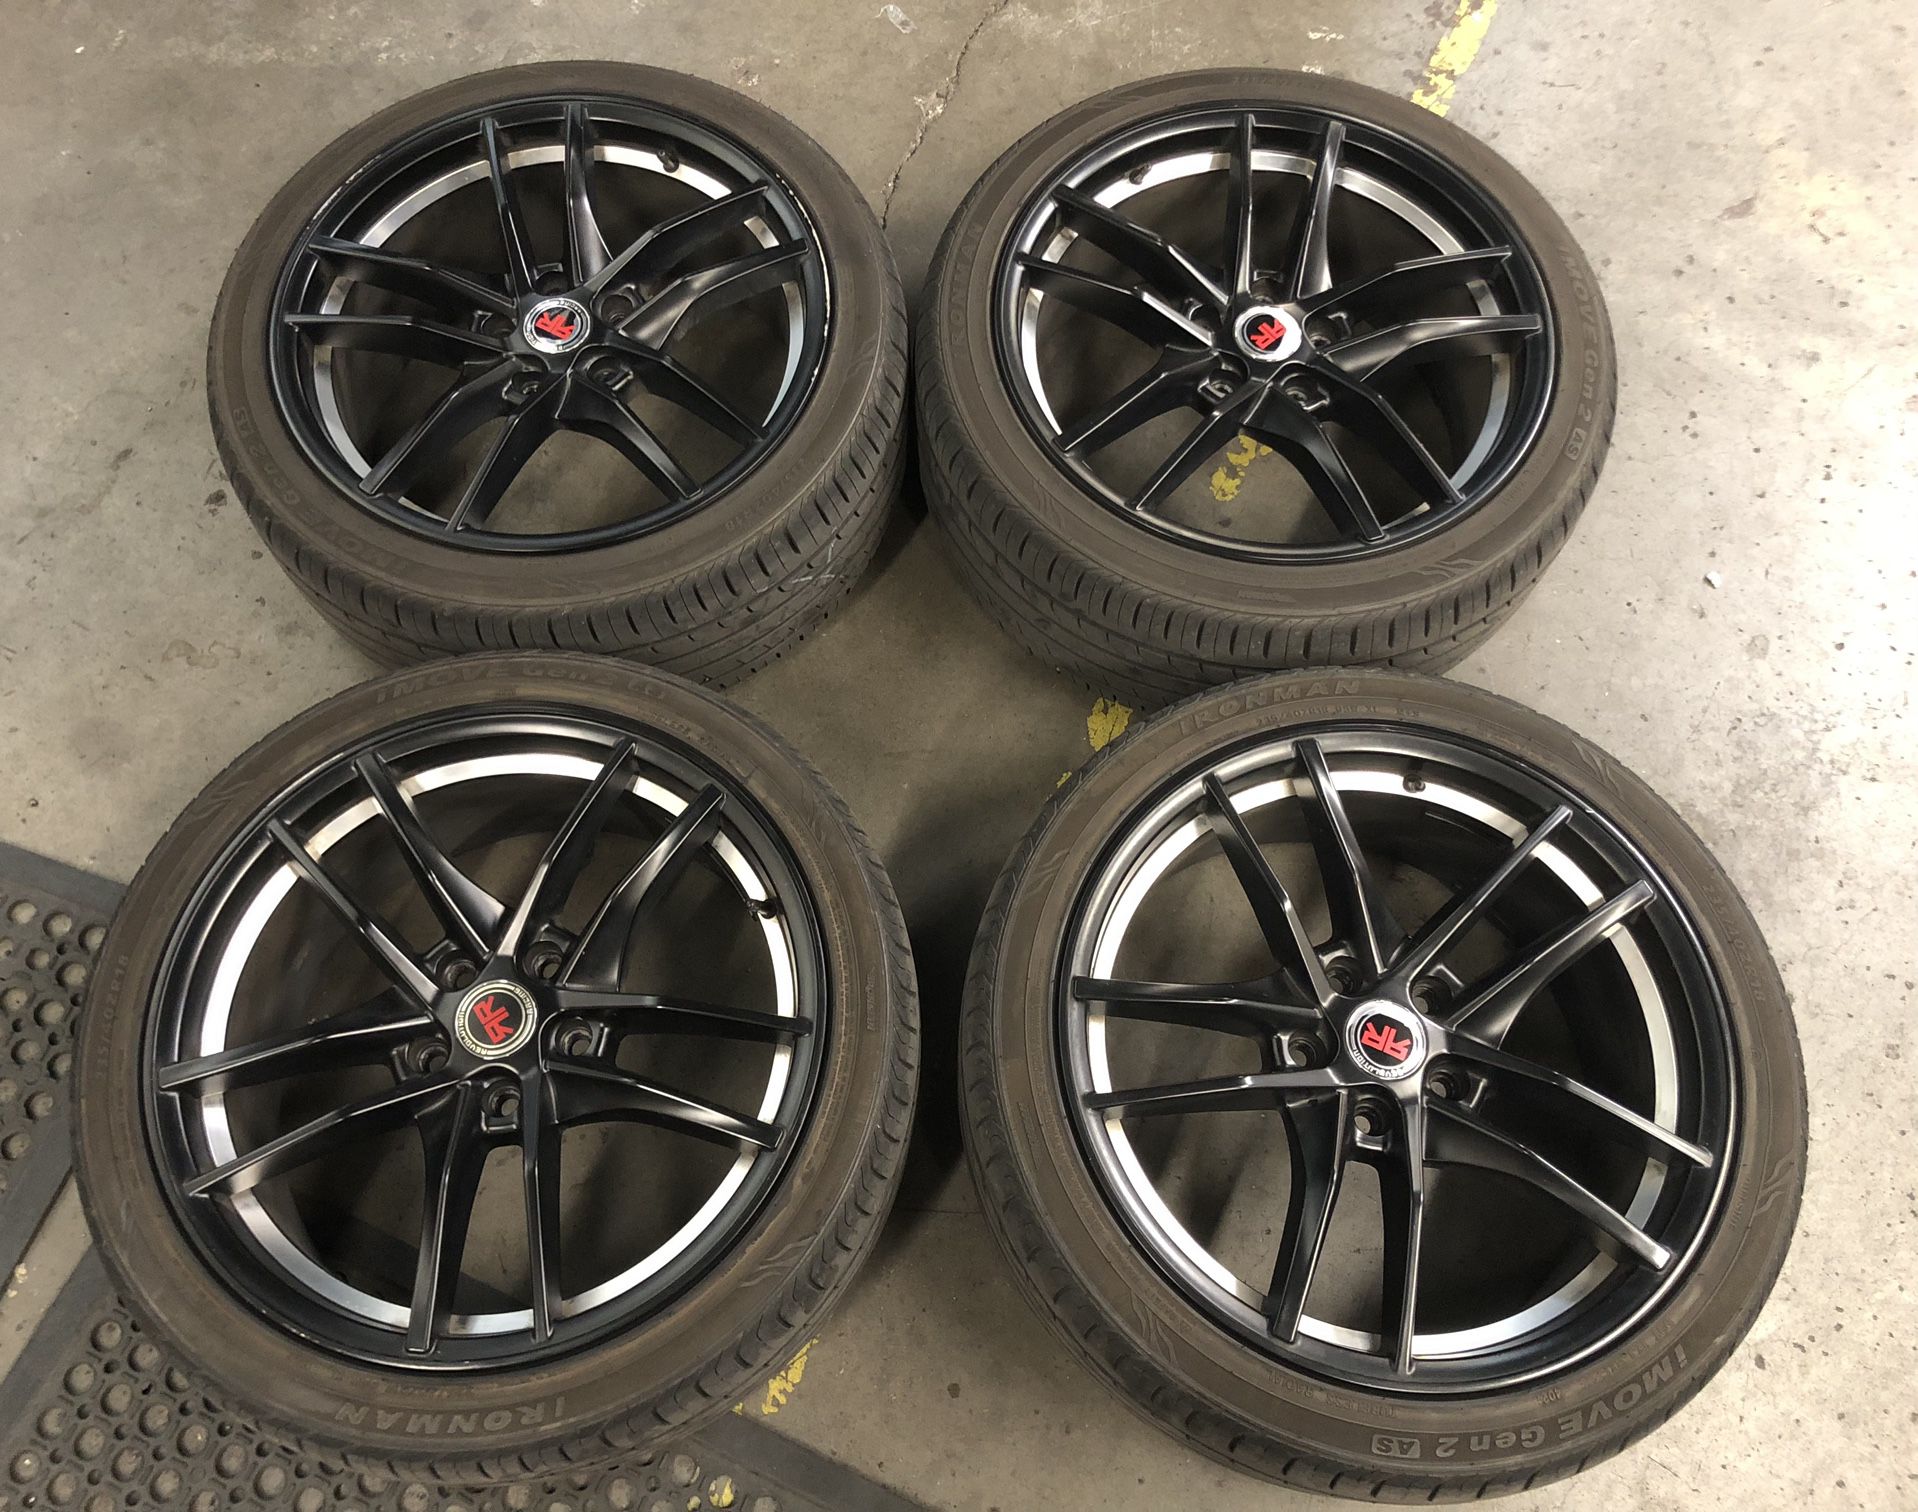 used set of Revolution Racing Rr28 Wheel 18x8  +40 offset 5x114.3 flat Black w/ silver Ring with 235/40/18 Tires